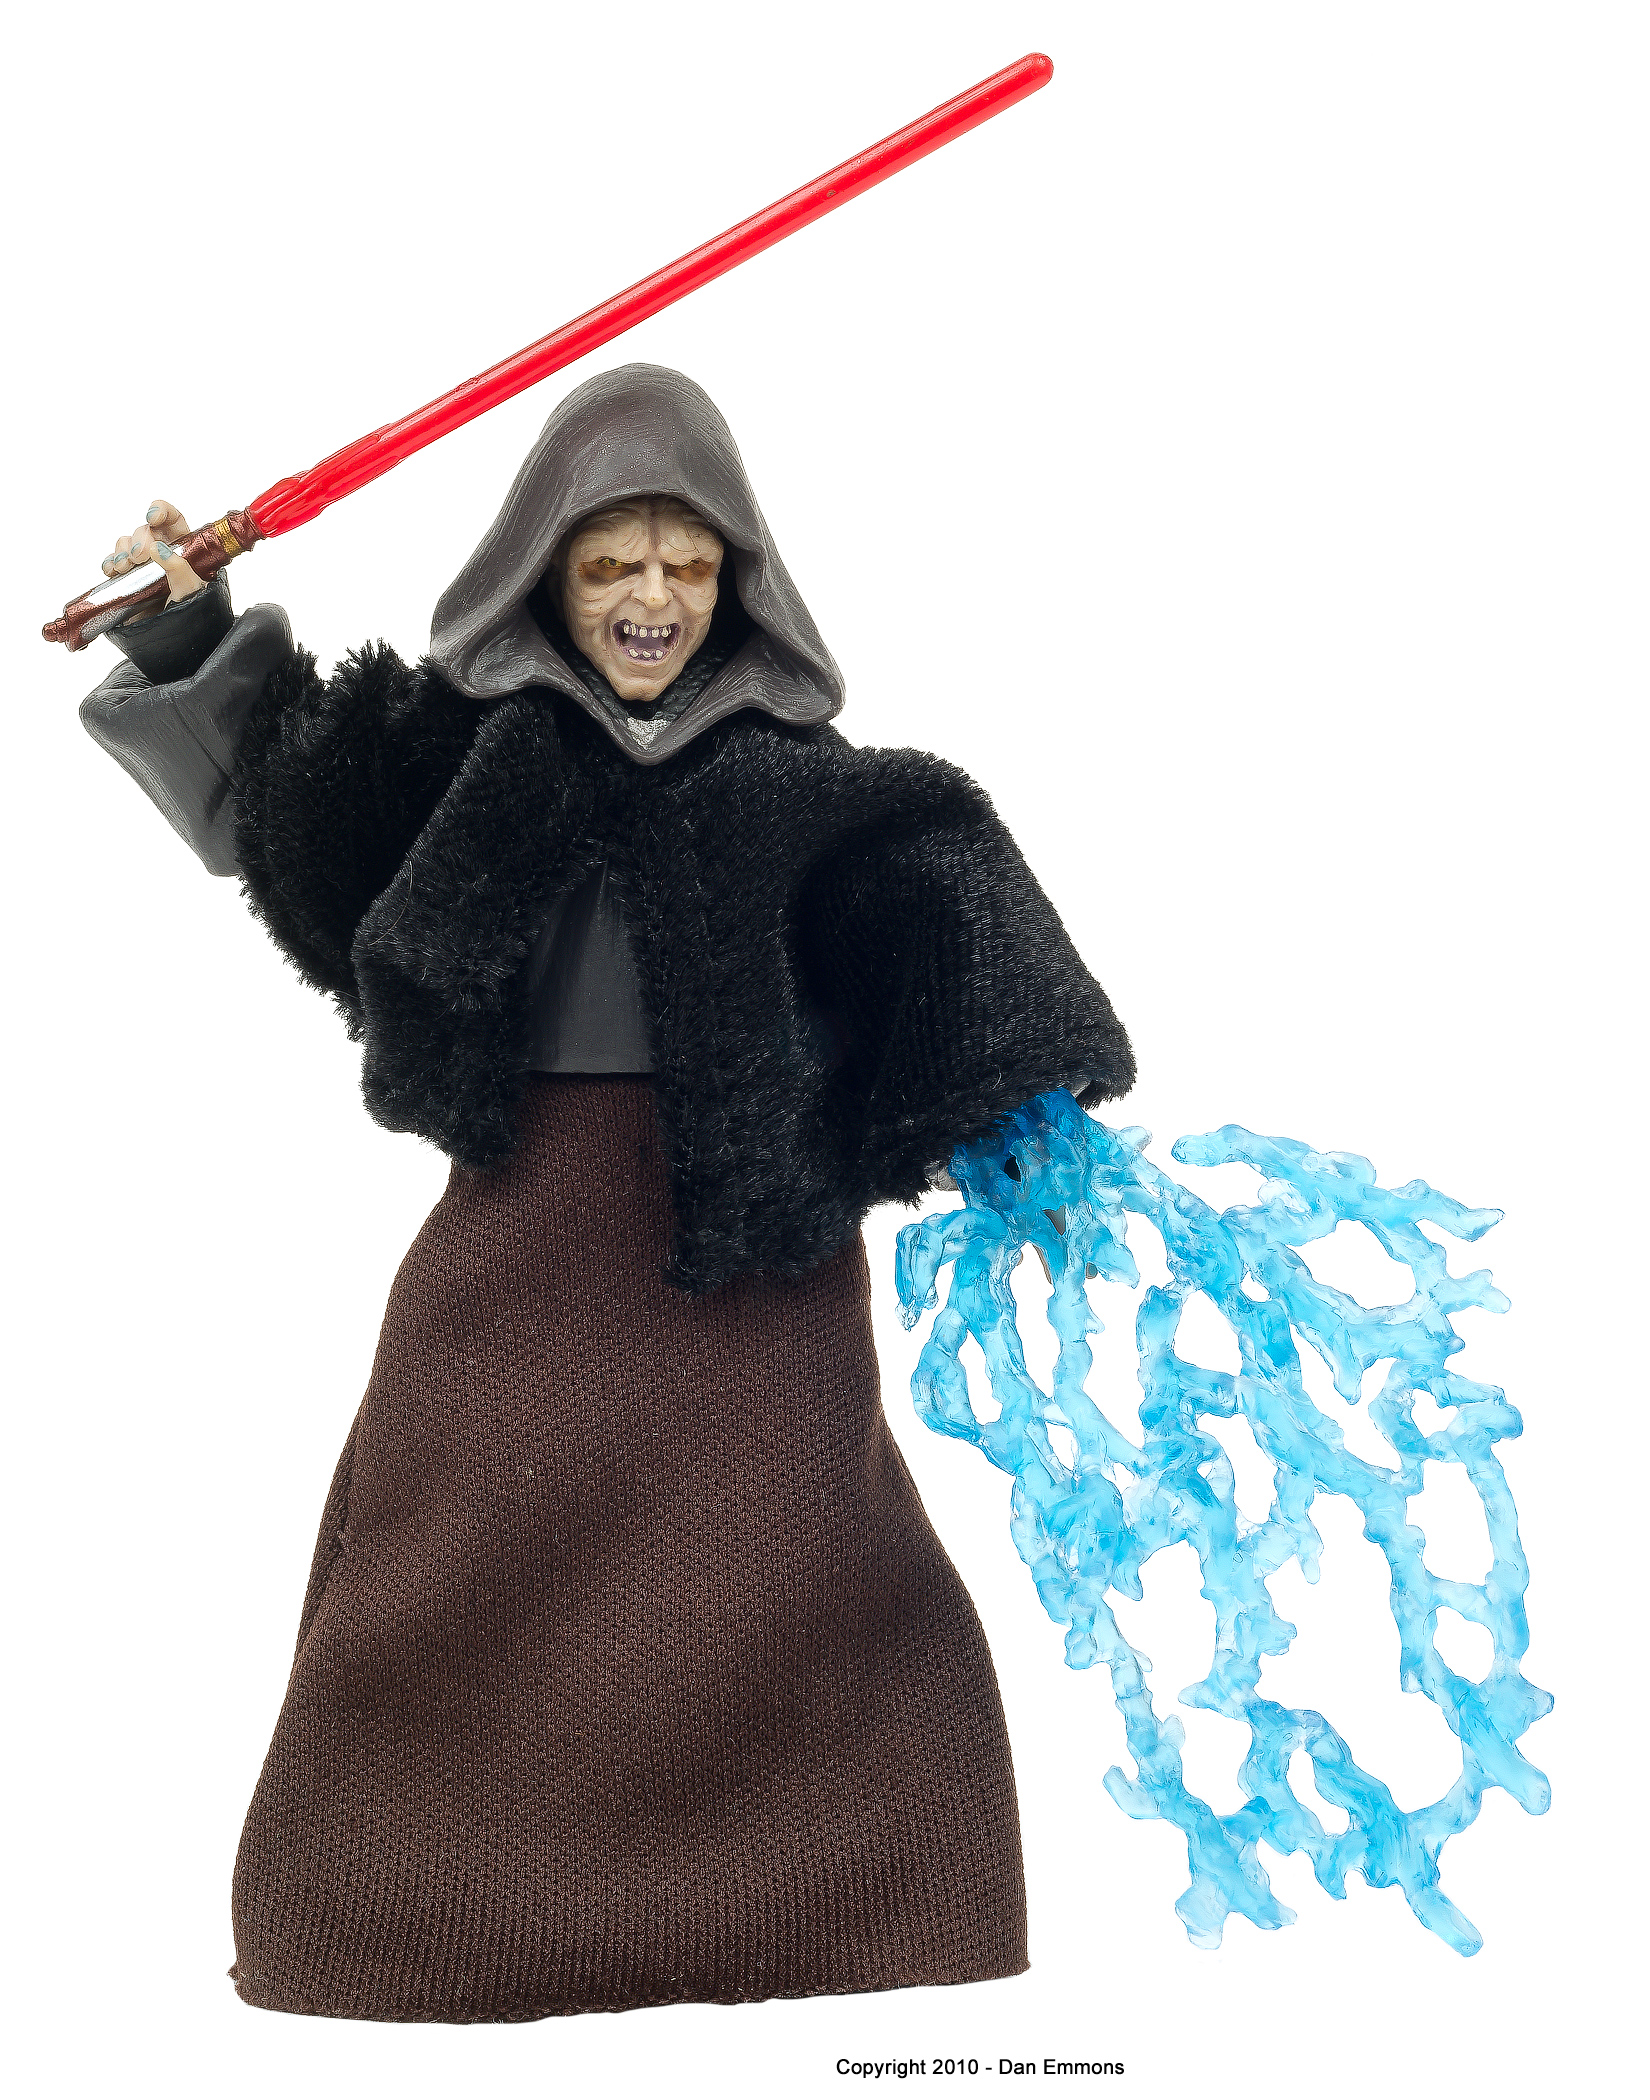 The Vintage Collection - VC12: Darth Sidious